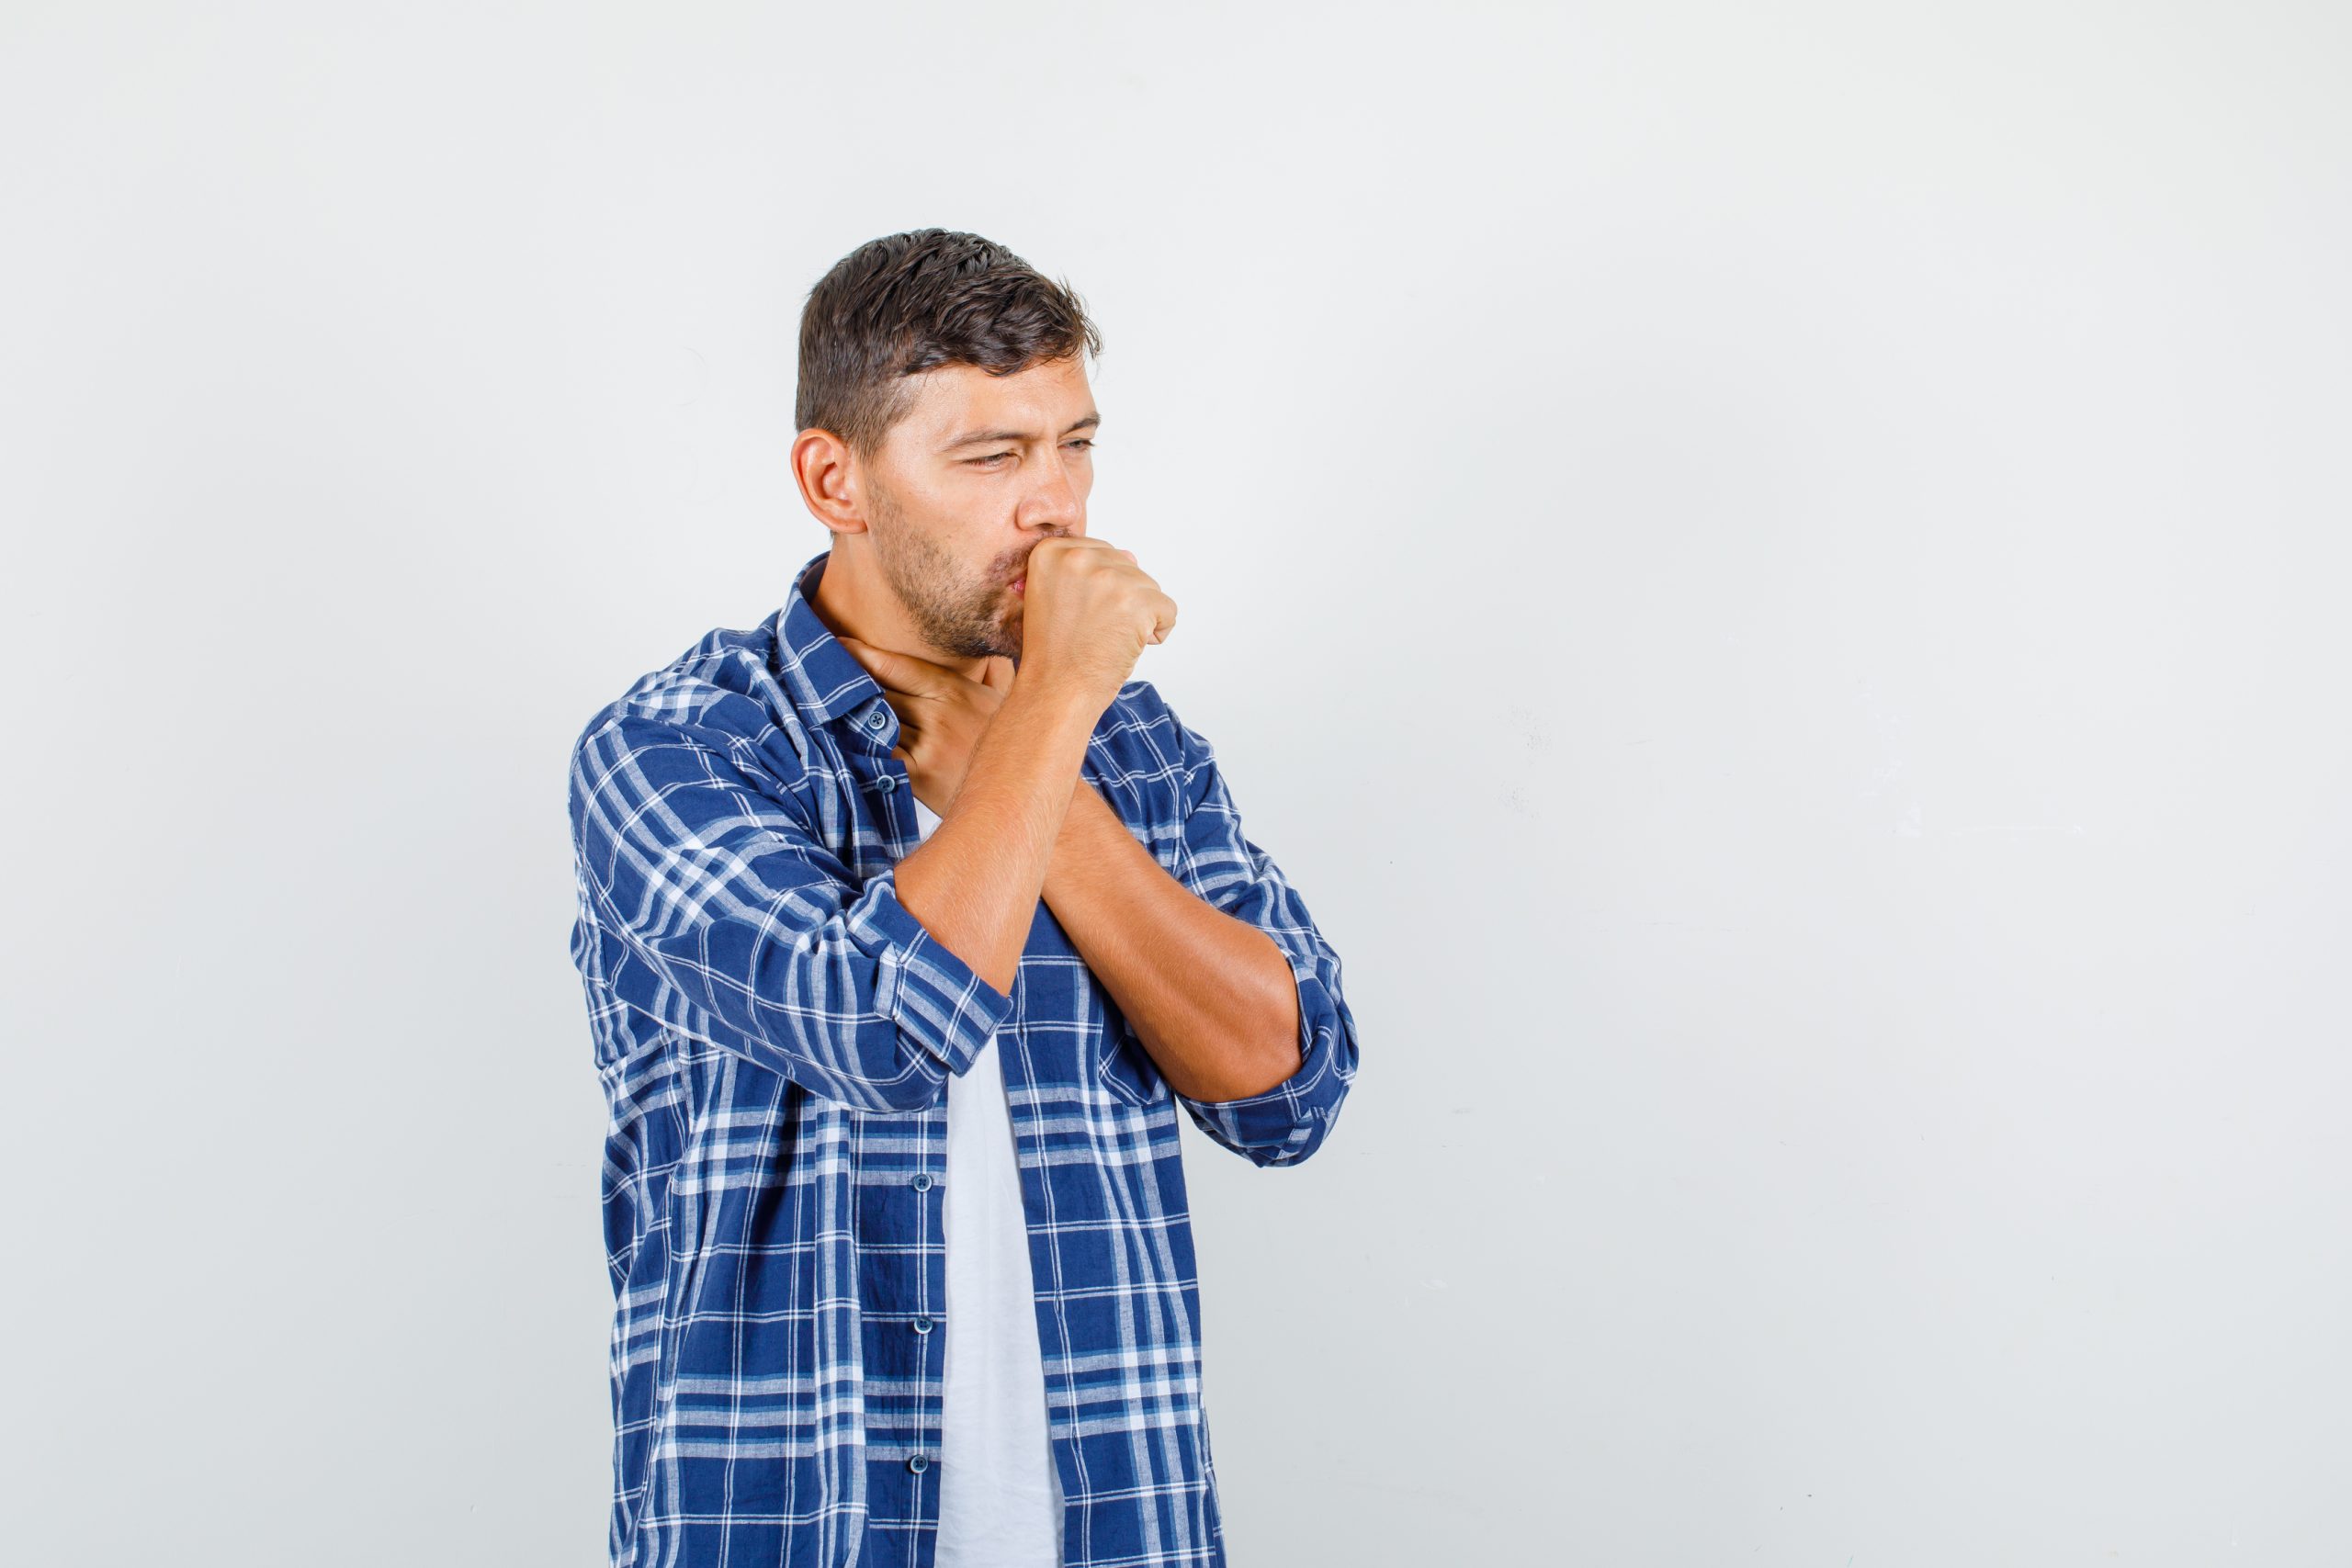 Nasal Pertussis Vaccine for whooping cough